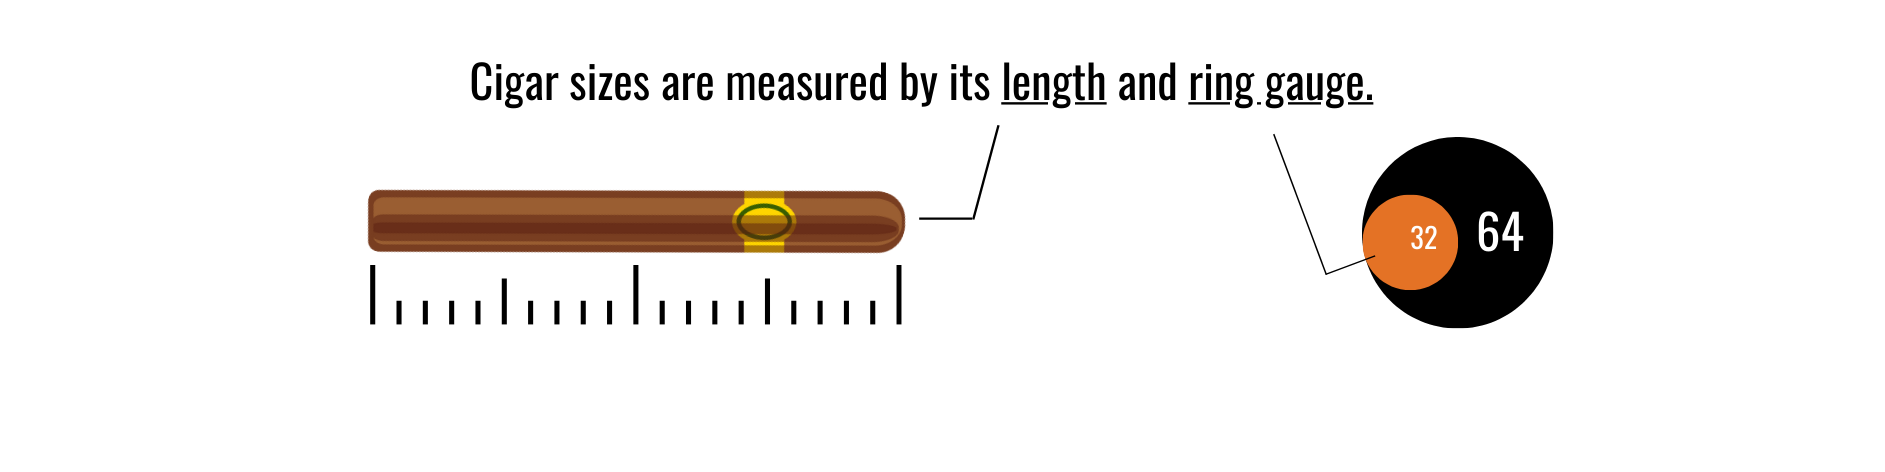 There are two main dimensions when it comes to cigars: length and ring gauge.